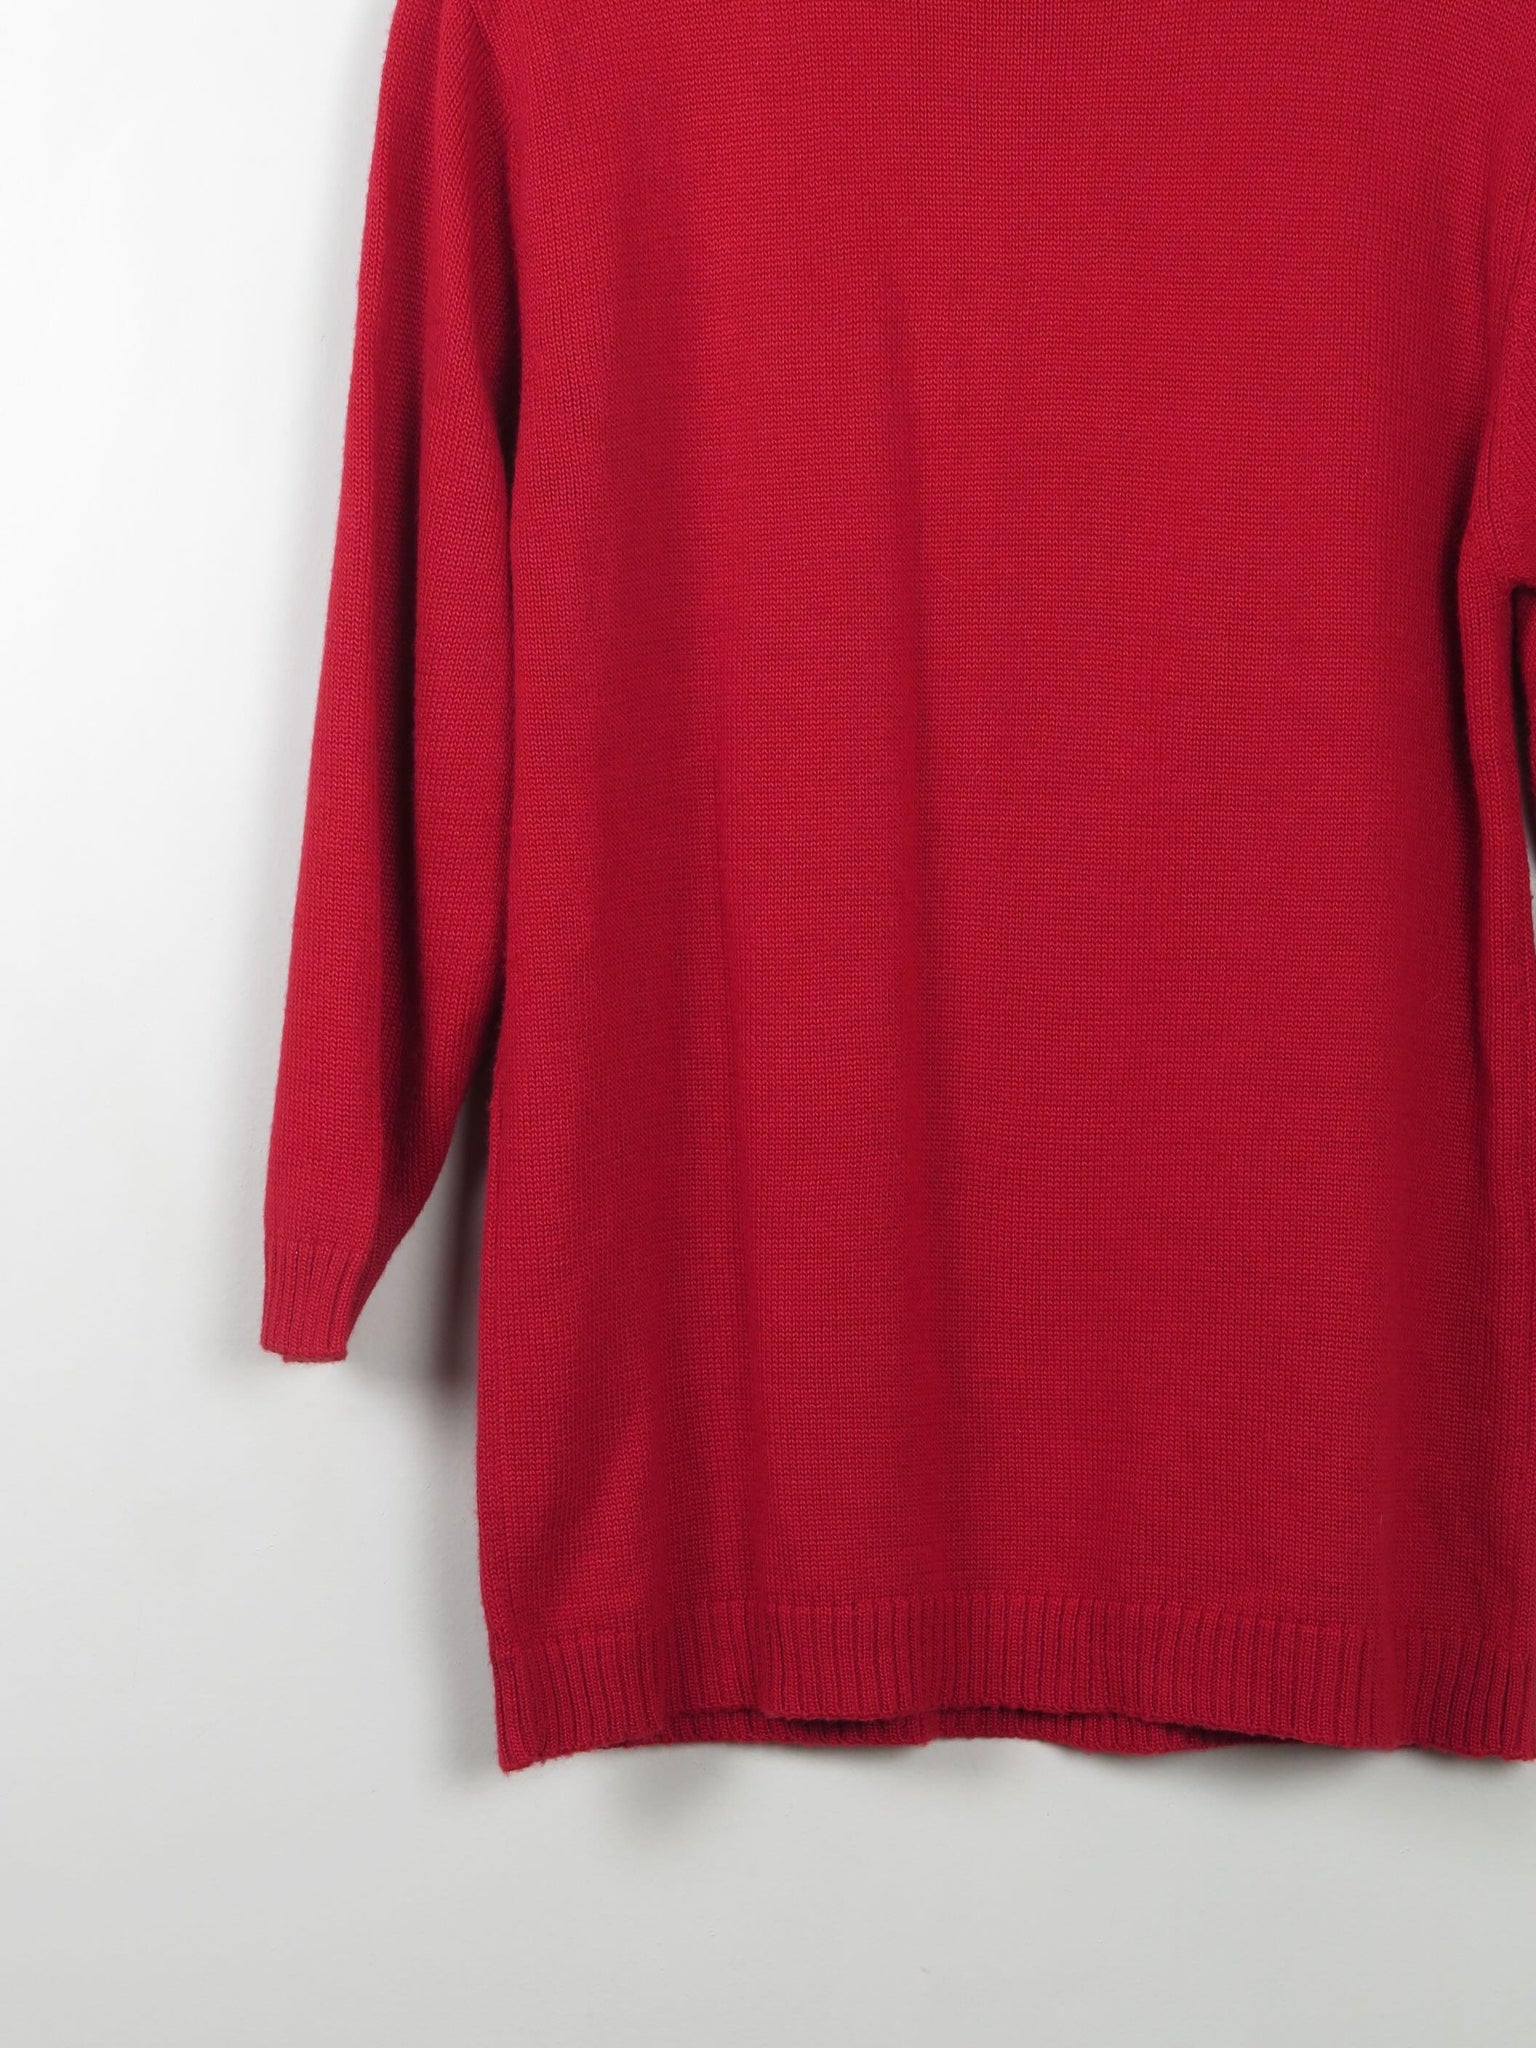 Women's Red Vintage Embroidered Jumper S - The Harlequin